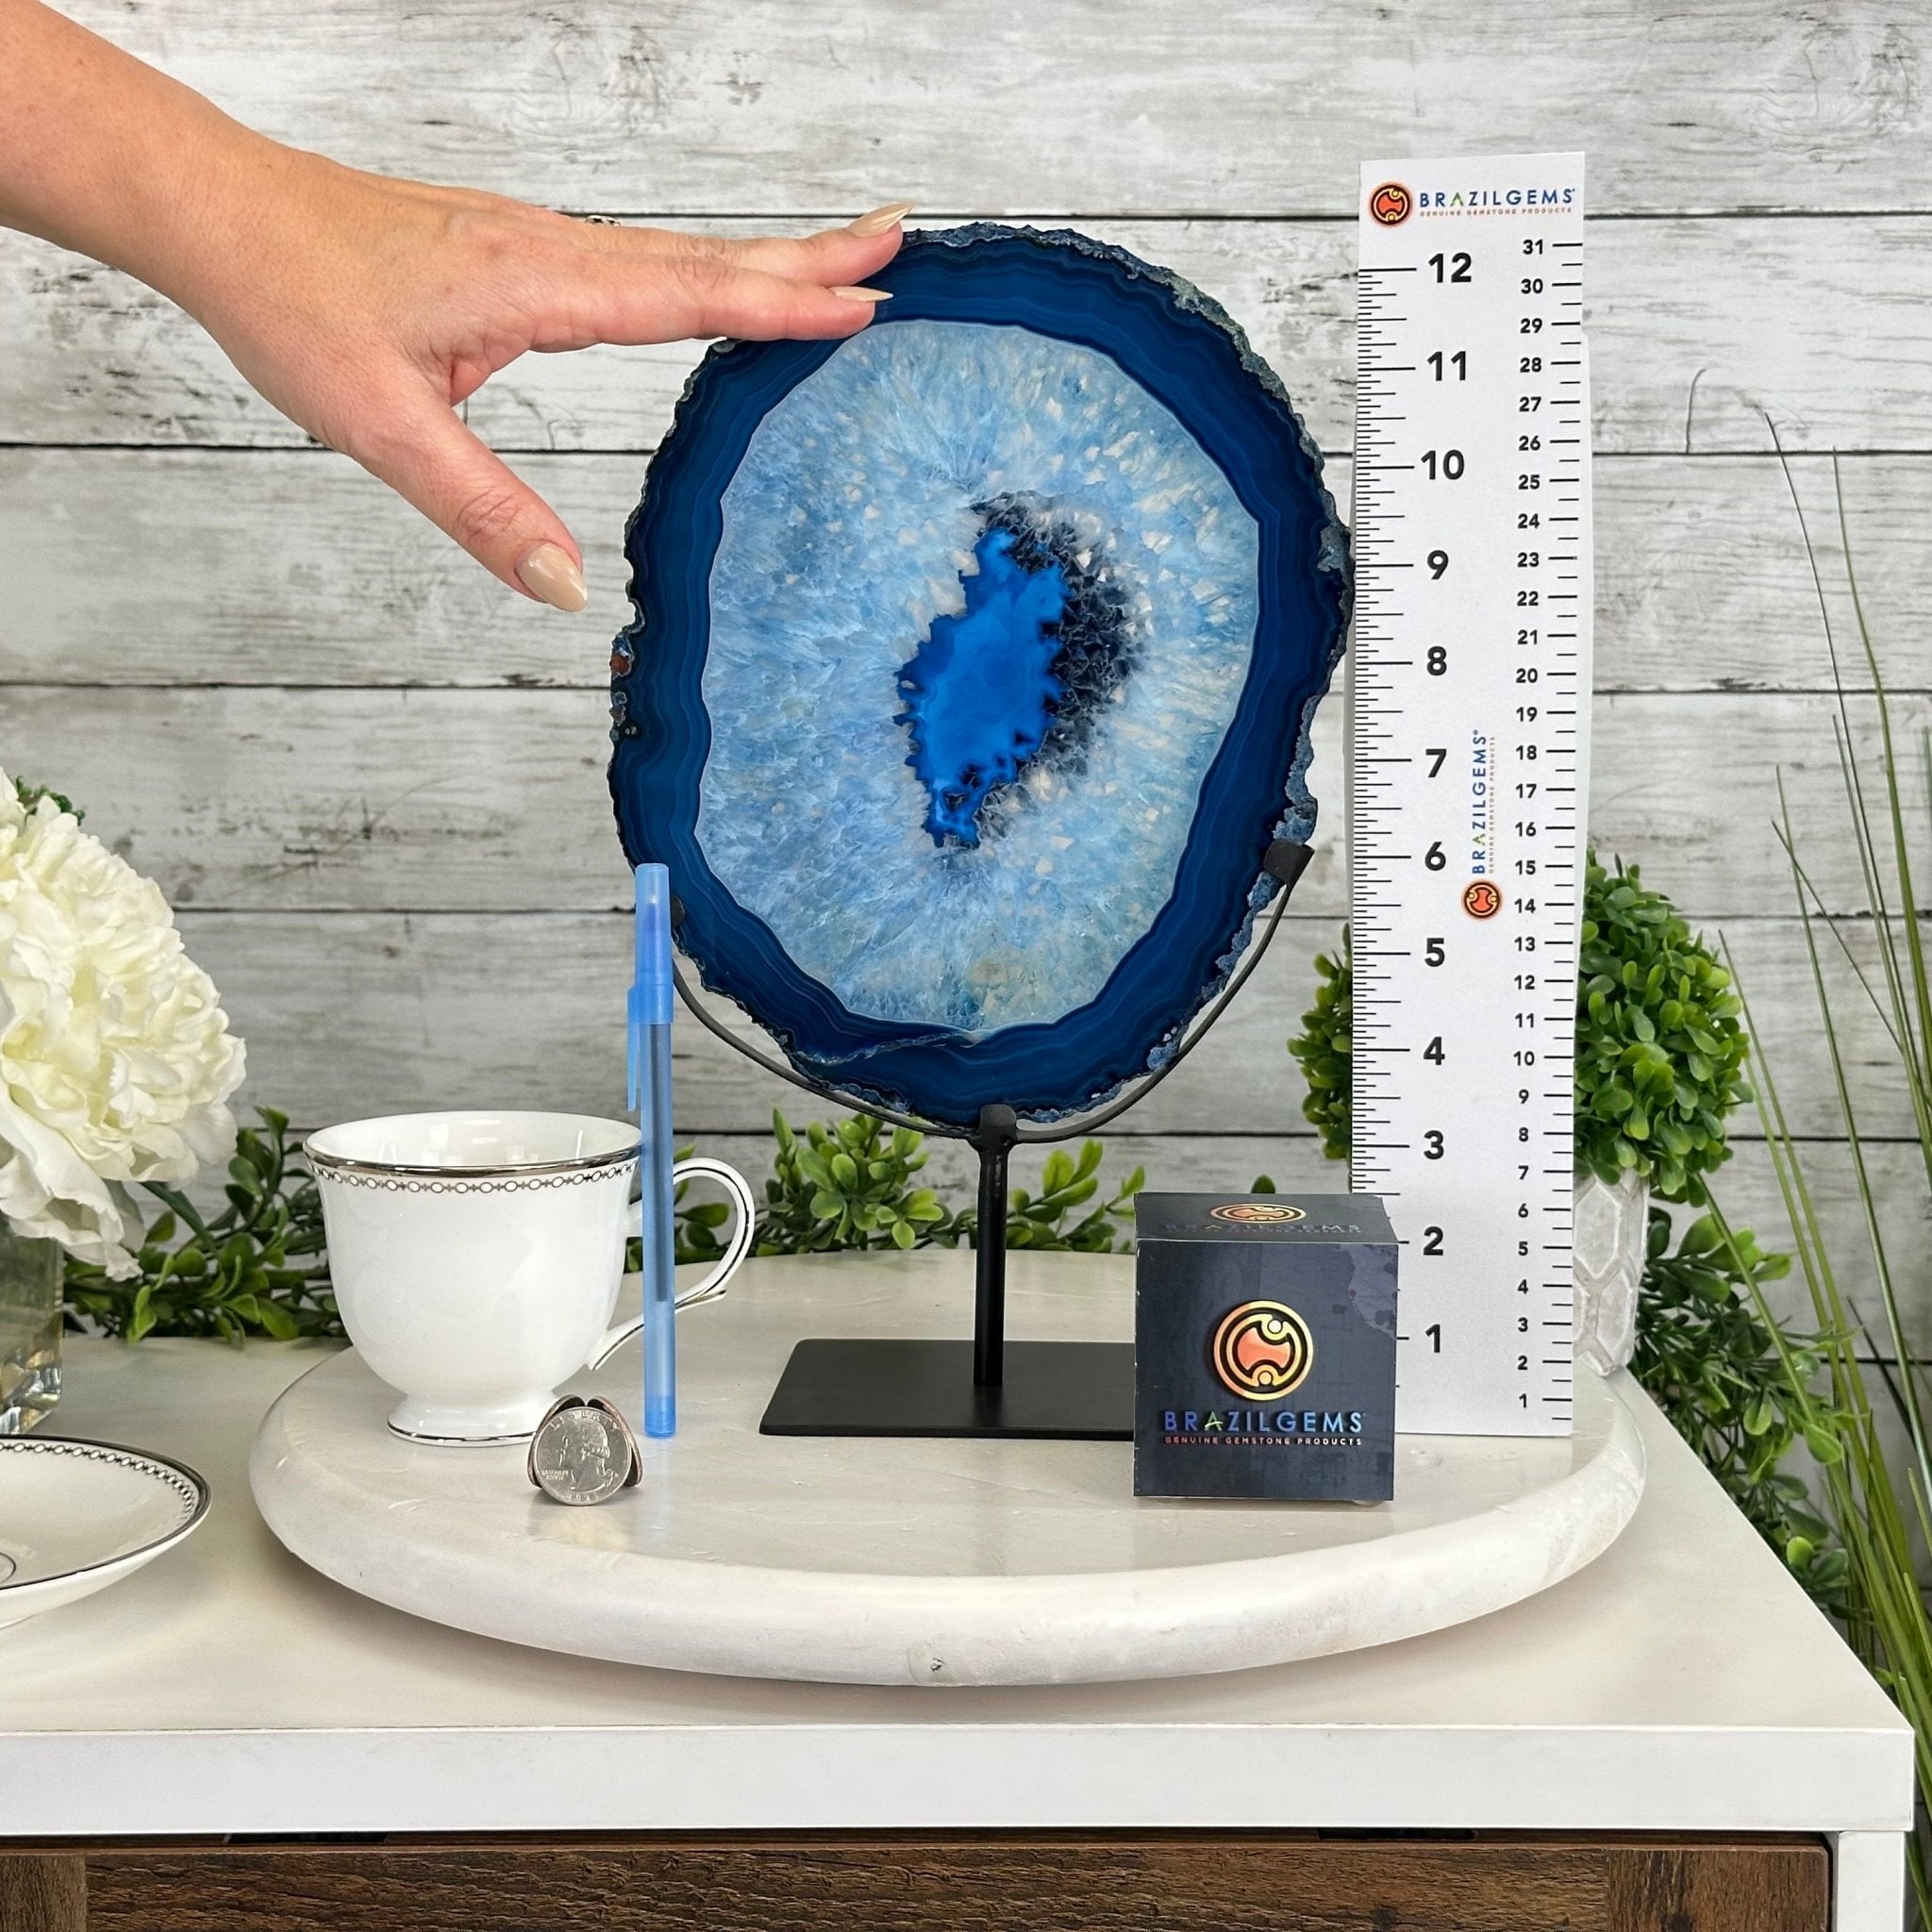 Brazilian Blue Agate Slice on a Metal Stand, 12.5" Tall #5055-0138 - Brazil GemsBrazil GemsBrazilian Blue Agate Slice on a Metal Stand, 12.5" Tall #5055-0138Slices on Fixed Bases5055-0138